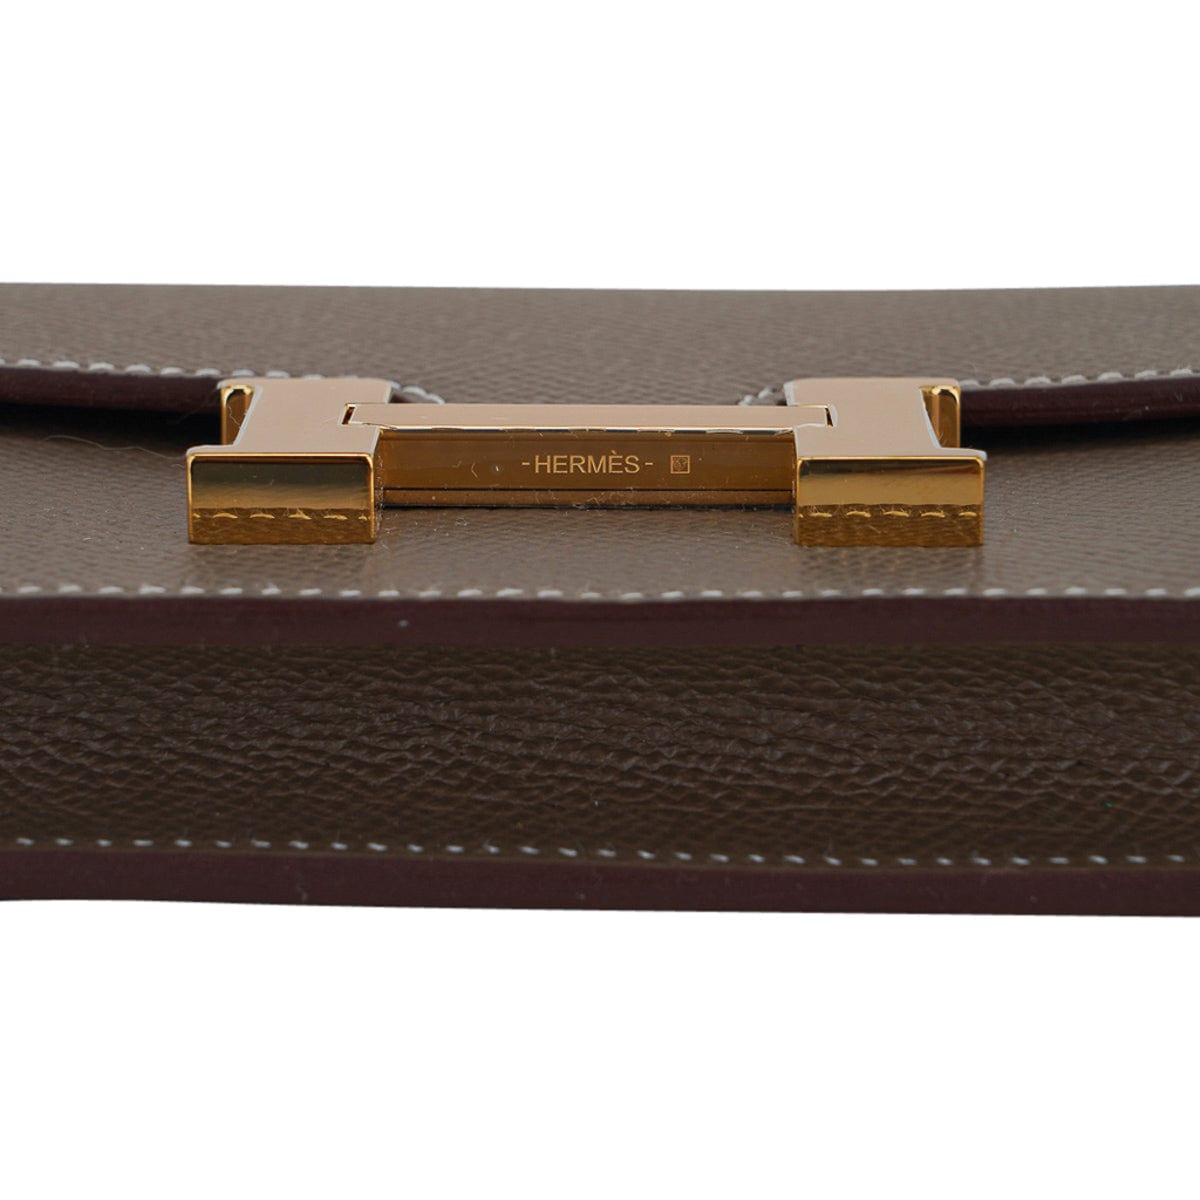 Louis Philippe Accessories, Louis Philippe Brown Signature Wallet